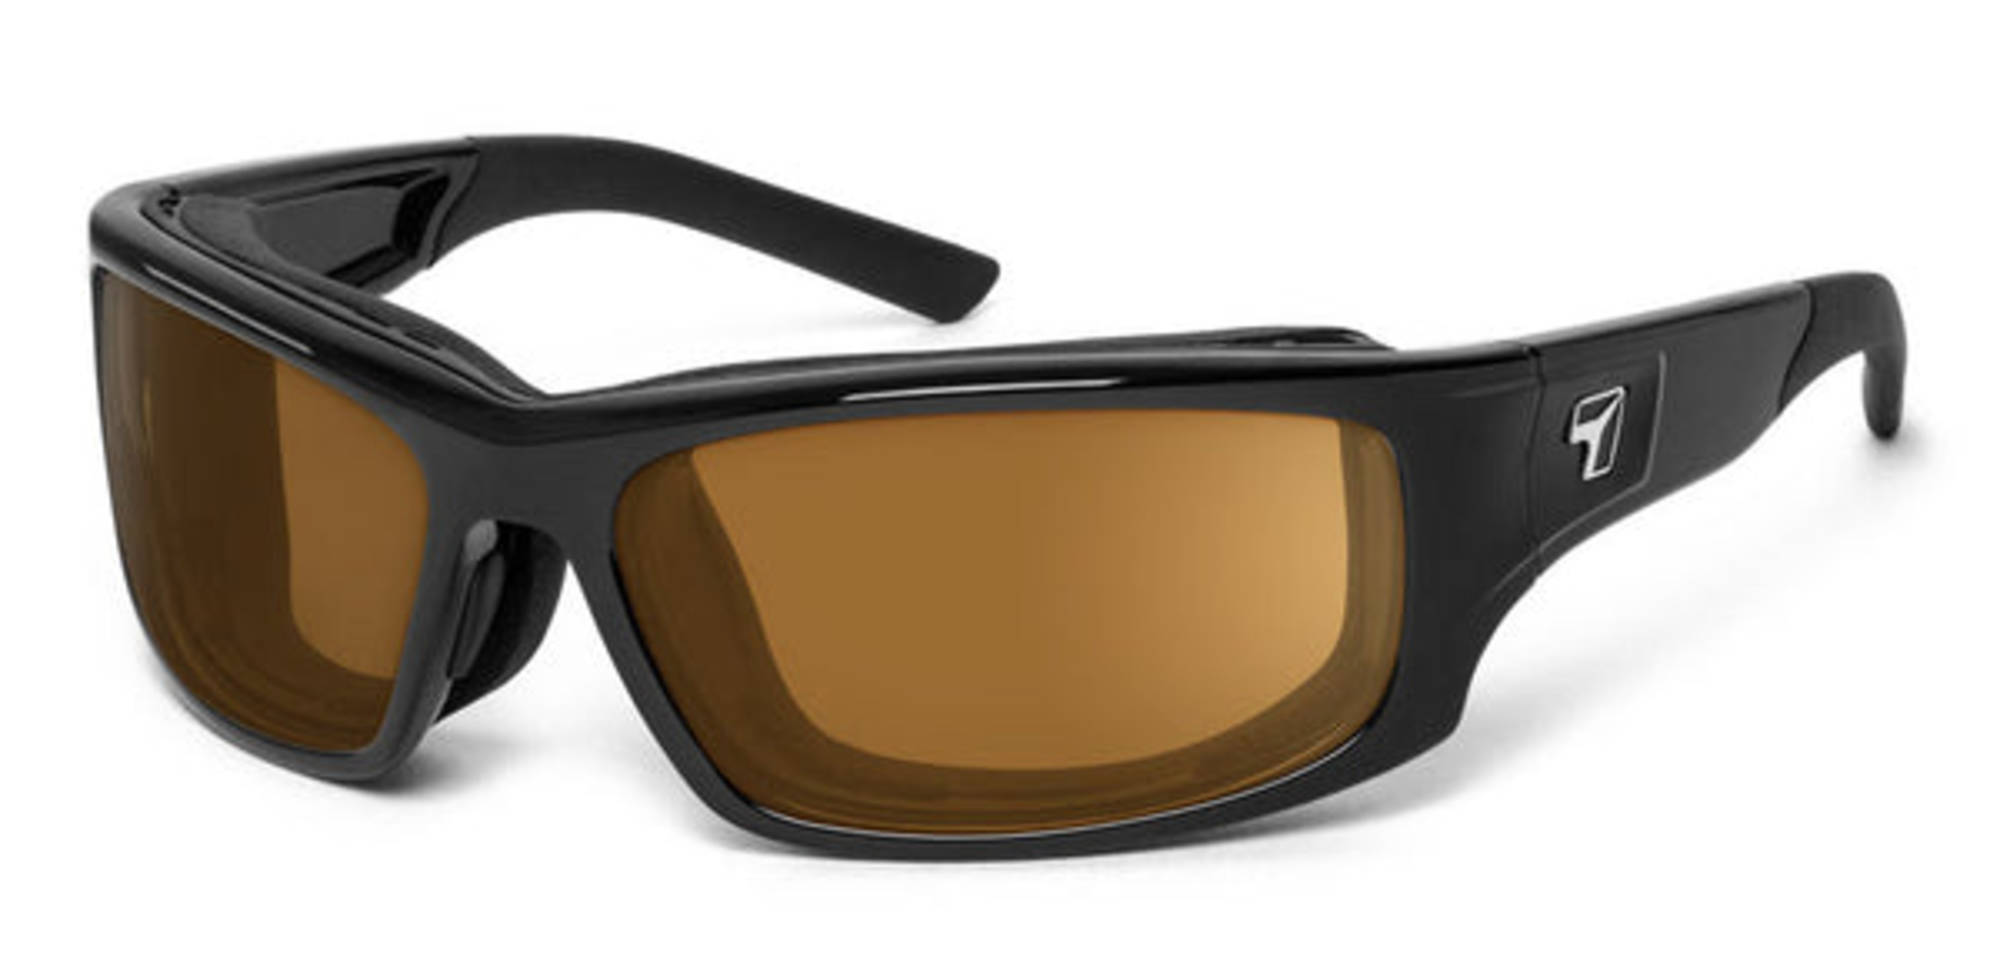 Be An Instant Badass With The New Machines X Roka Sunglasses